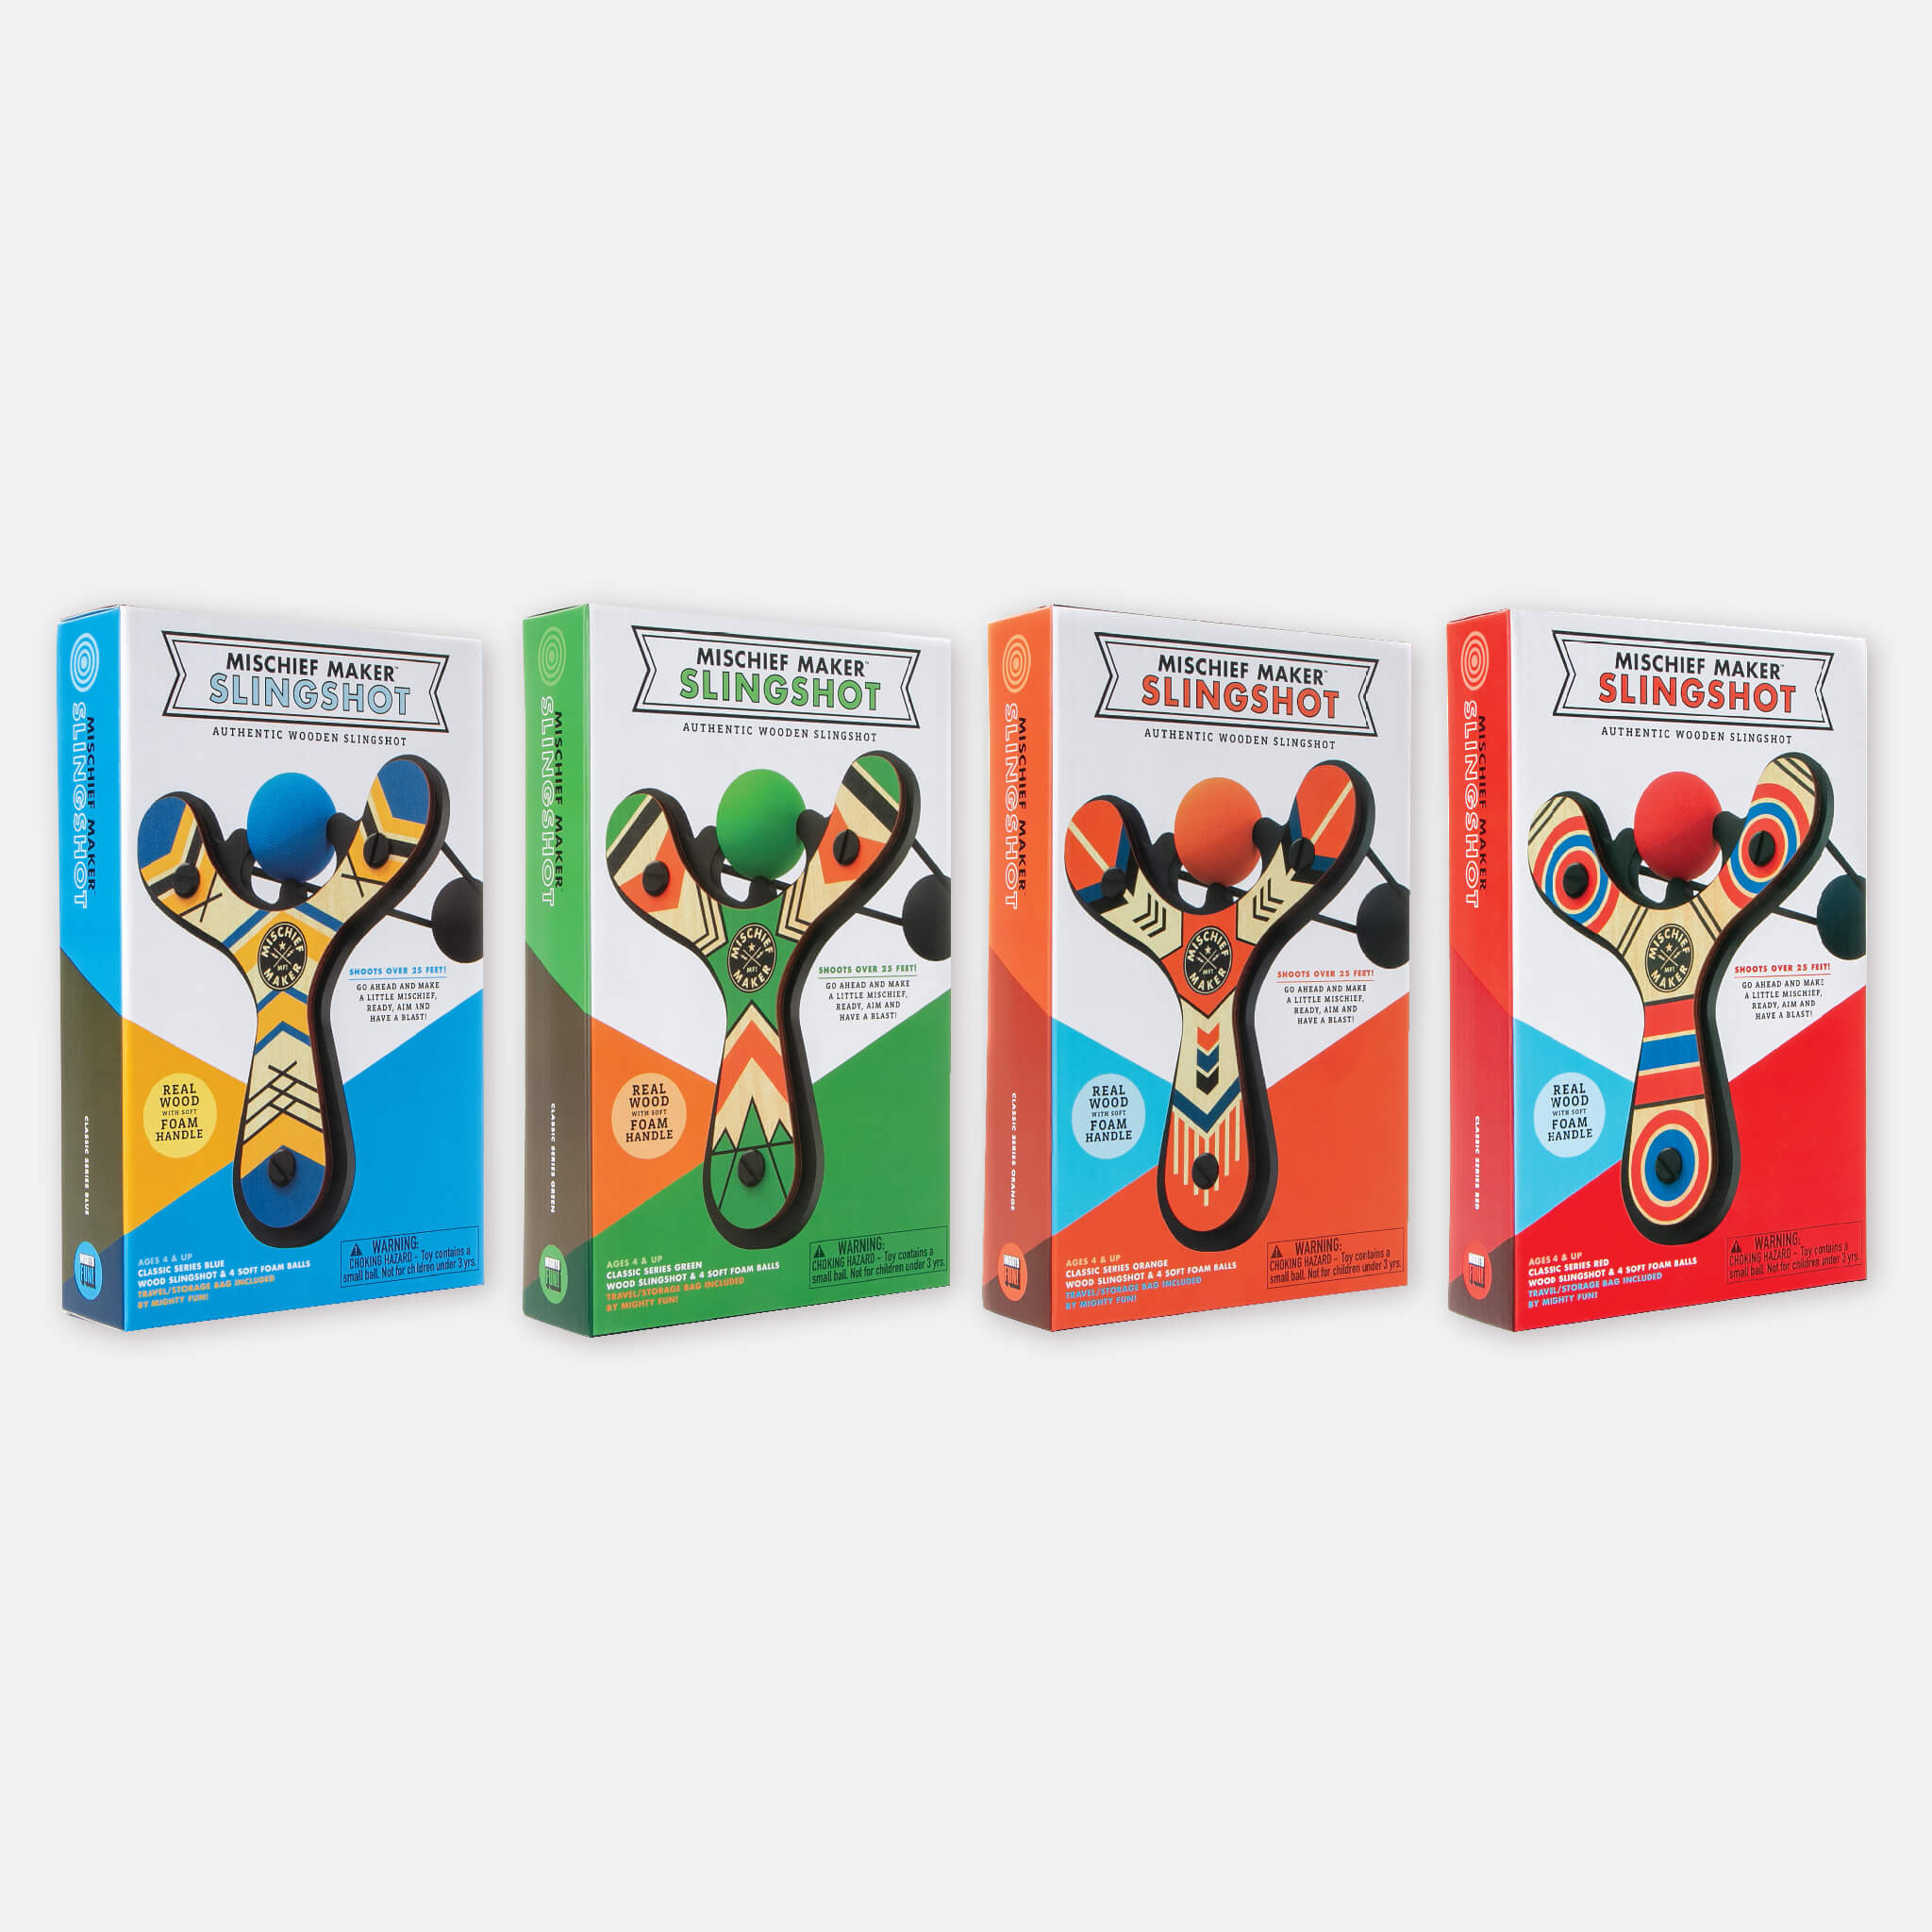 Classic wood slingshot color gift boxes including blue, green, orange, and red by Mighty Fun!